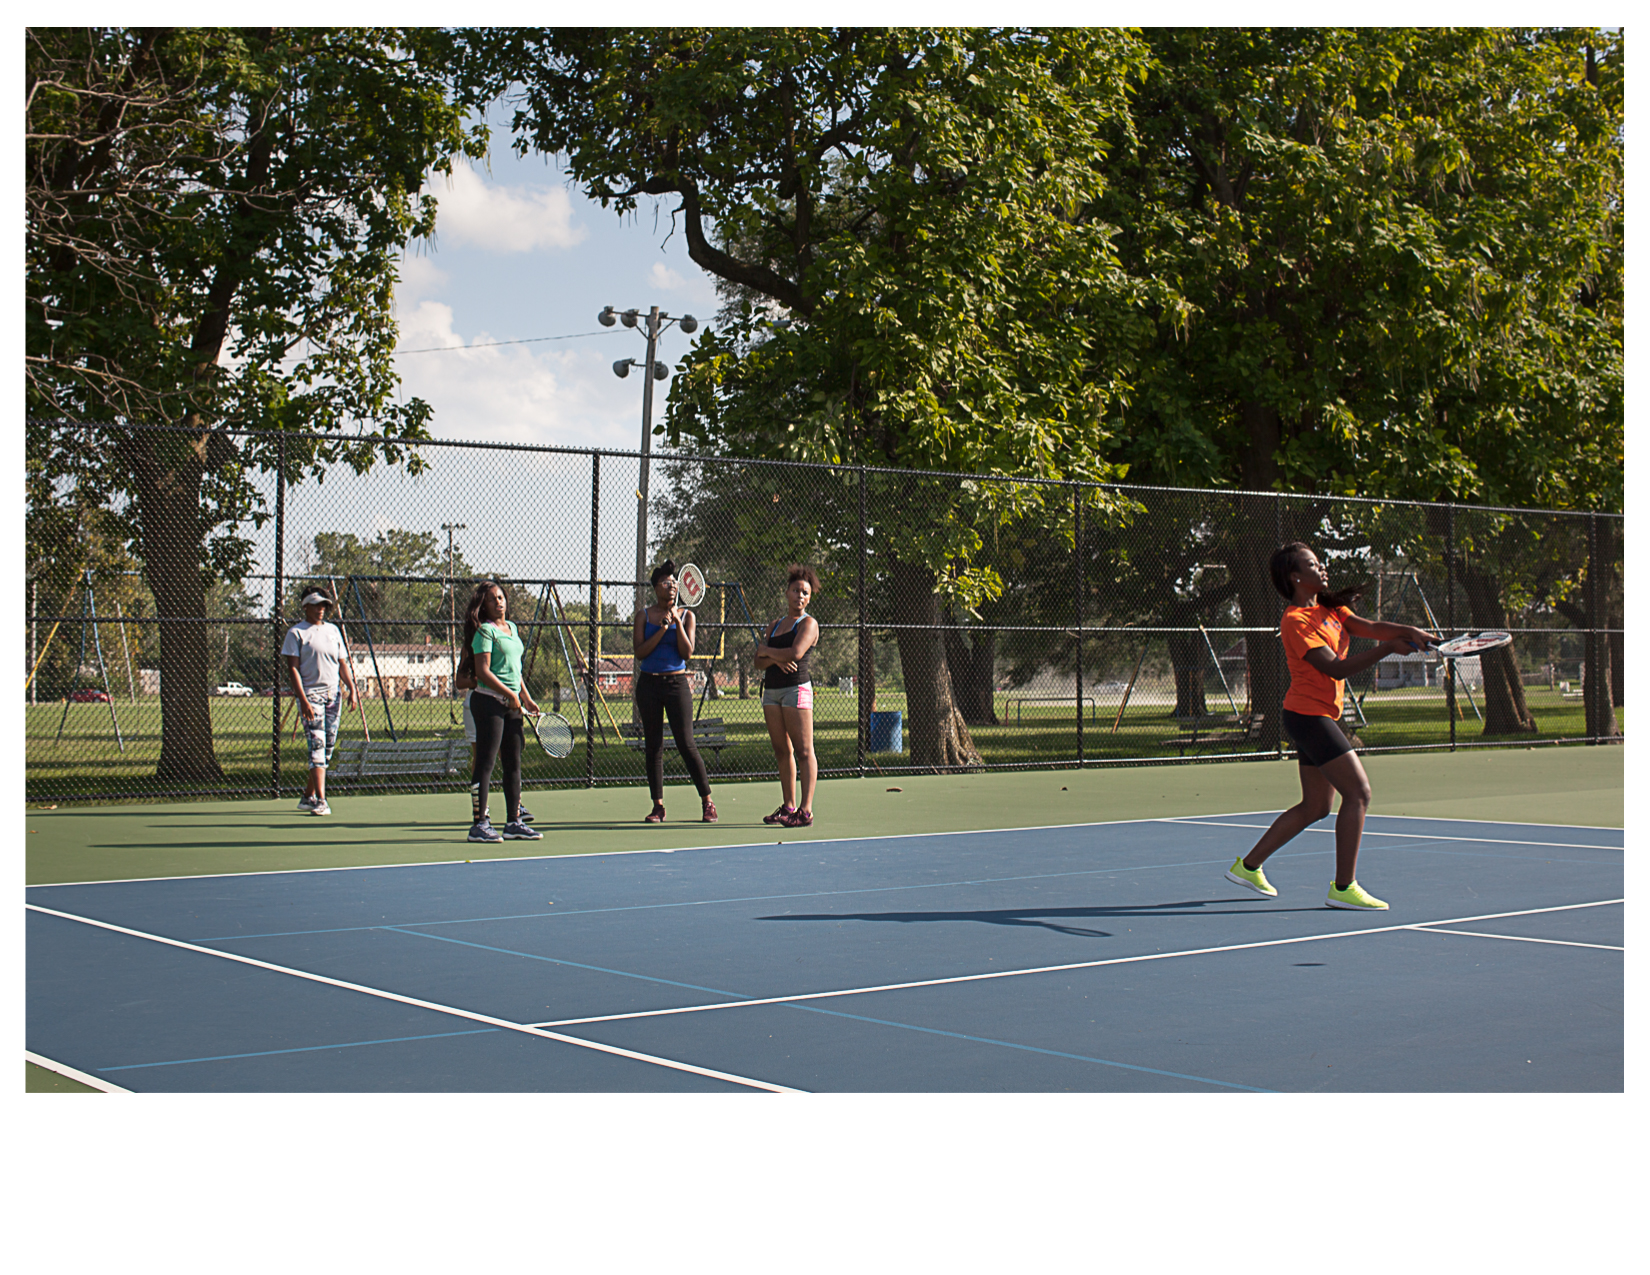 East St Louis High School Girls Tennis Team Practicing in  Lincoln Park, East St. Louis, IL